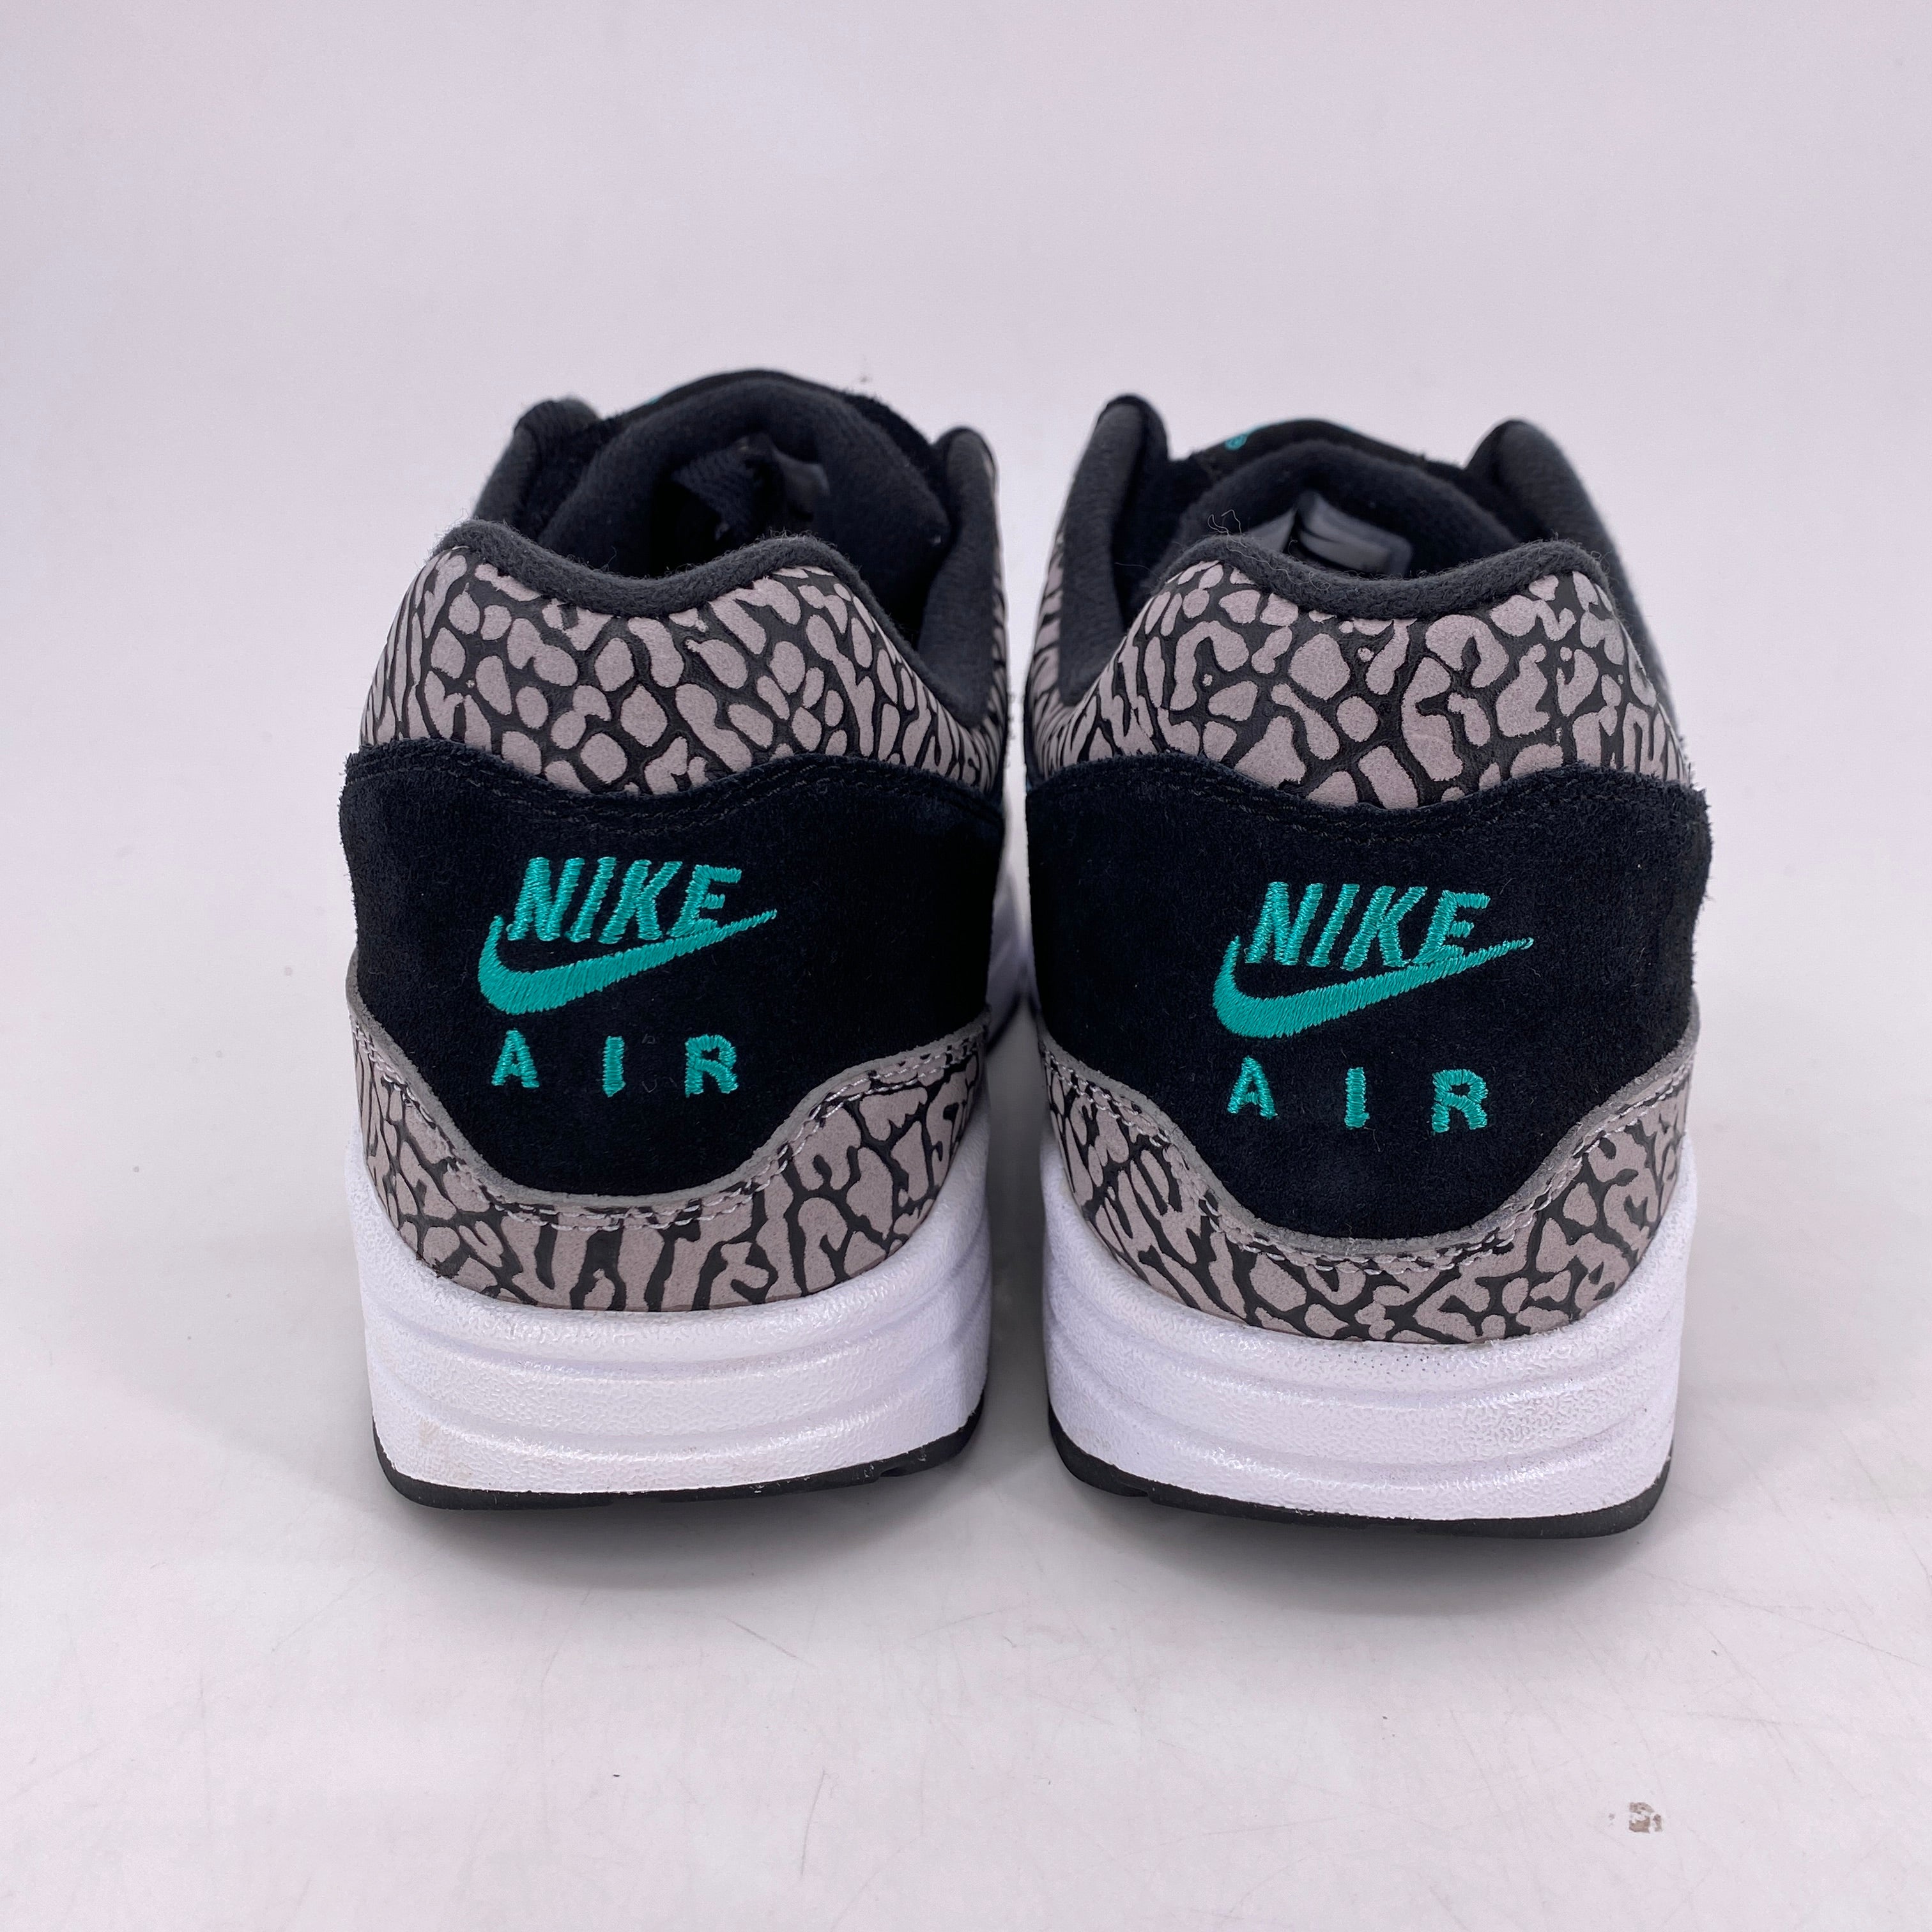 Nike Air Max 1 &quot;Atmos Elephant&quot; 2017 Used Size 10.5